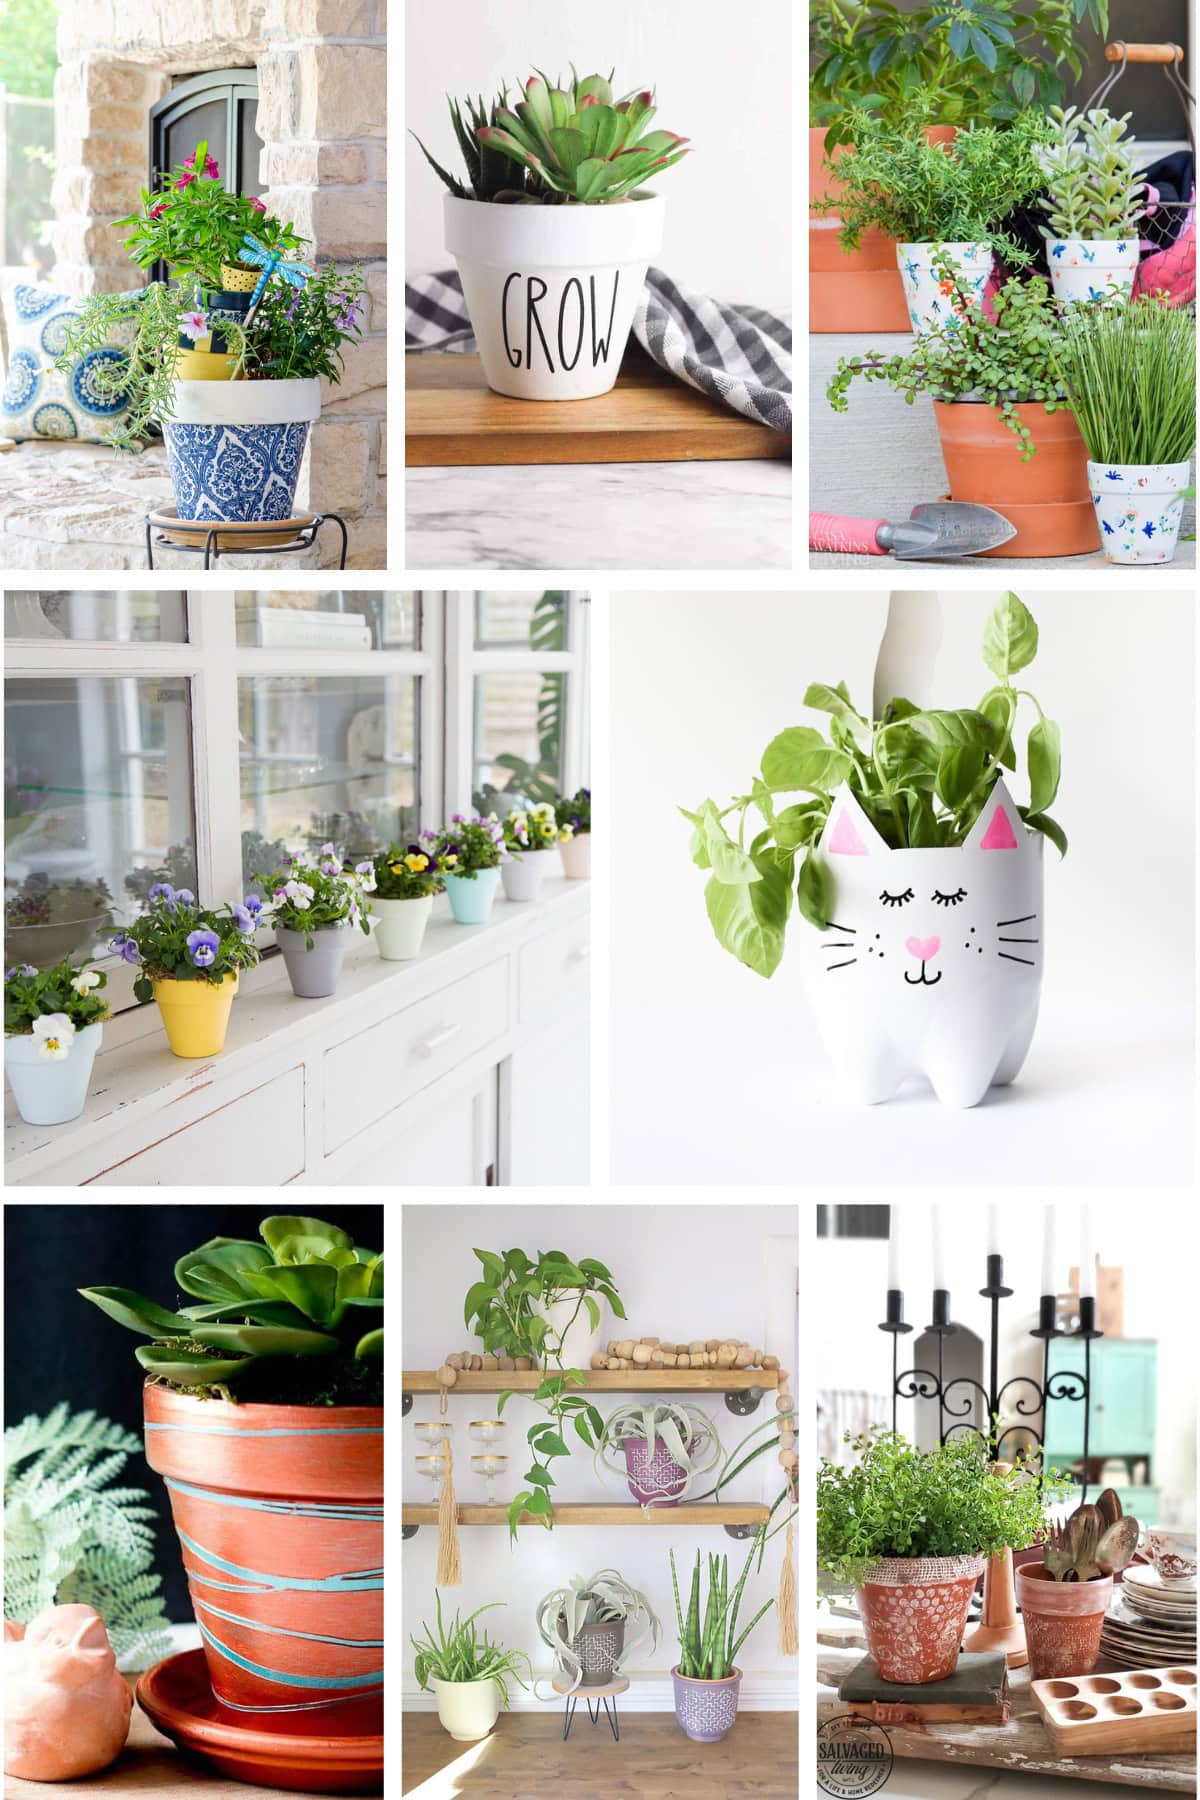 Collage of painted flower pots in different styles, including rustic, drip-painting, and boho-inspired designs.